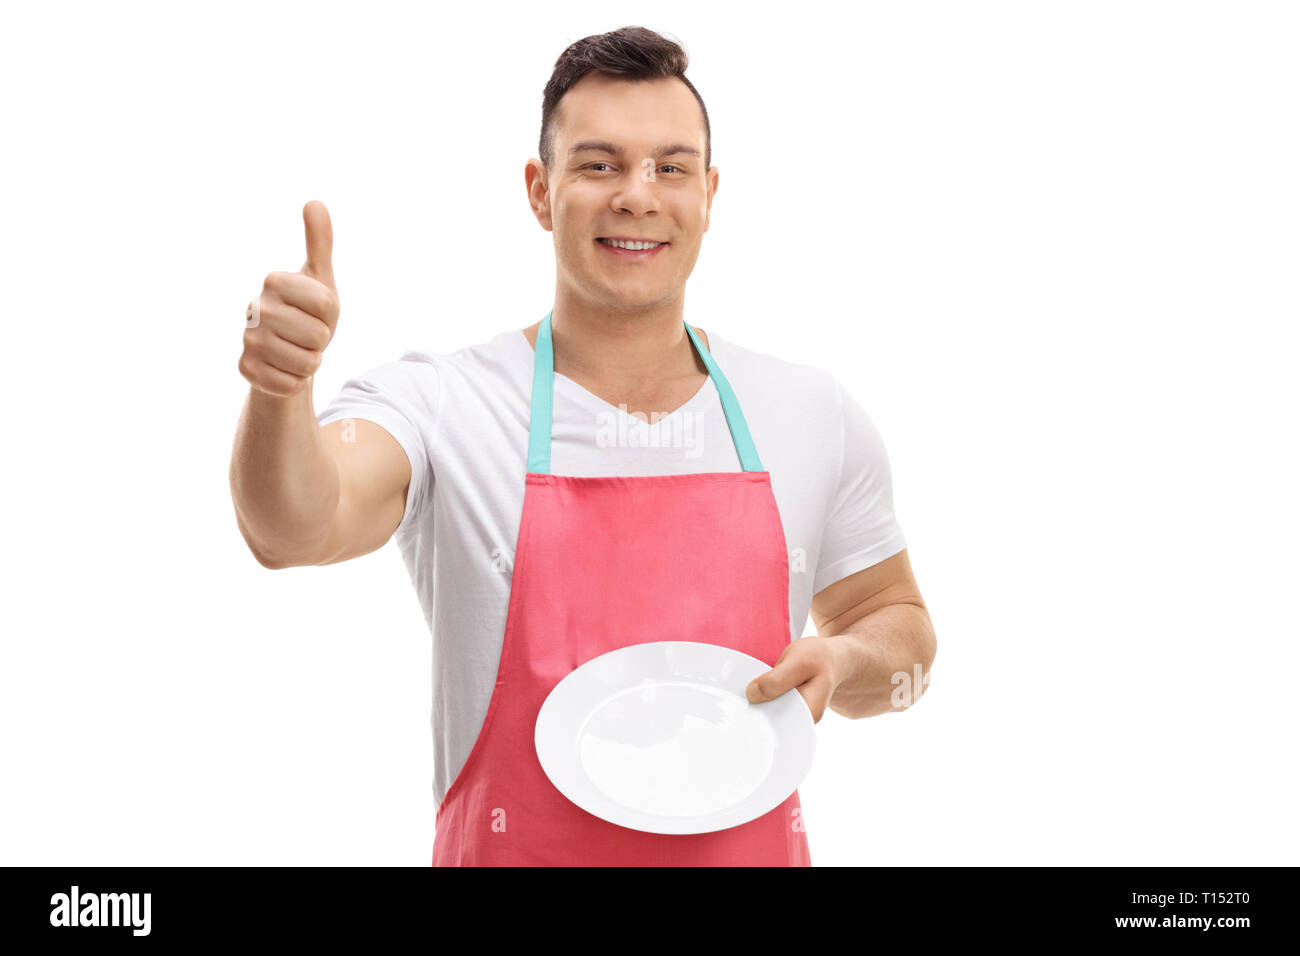 Young guy with an apron showing a clean plate and making a thumb up gesture isolated on white background Stock Photo